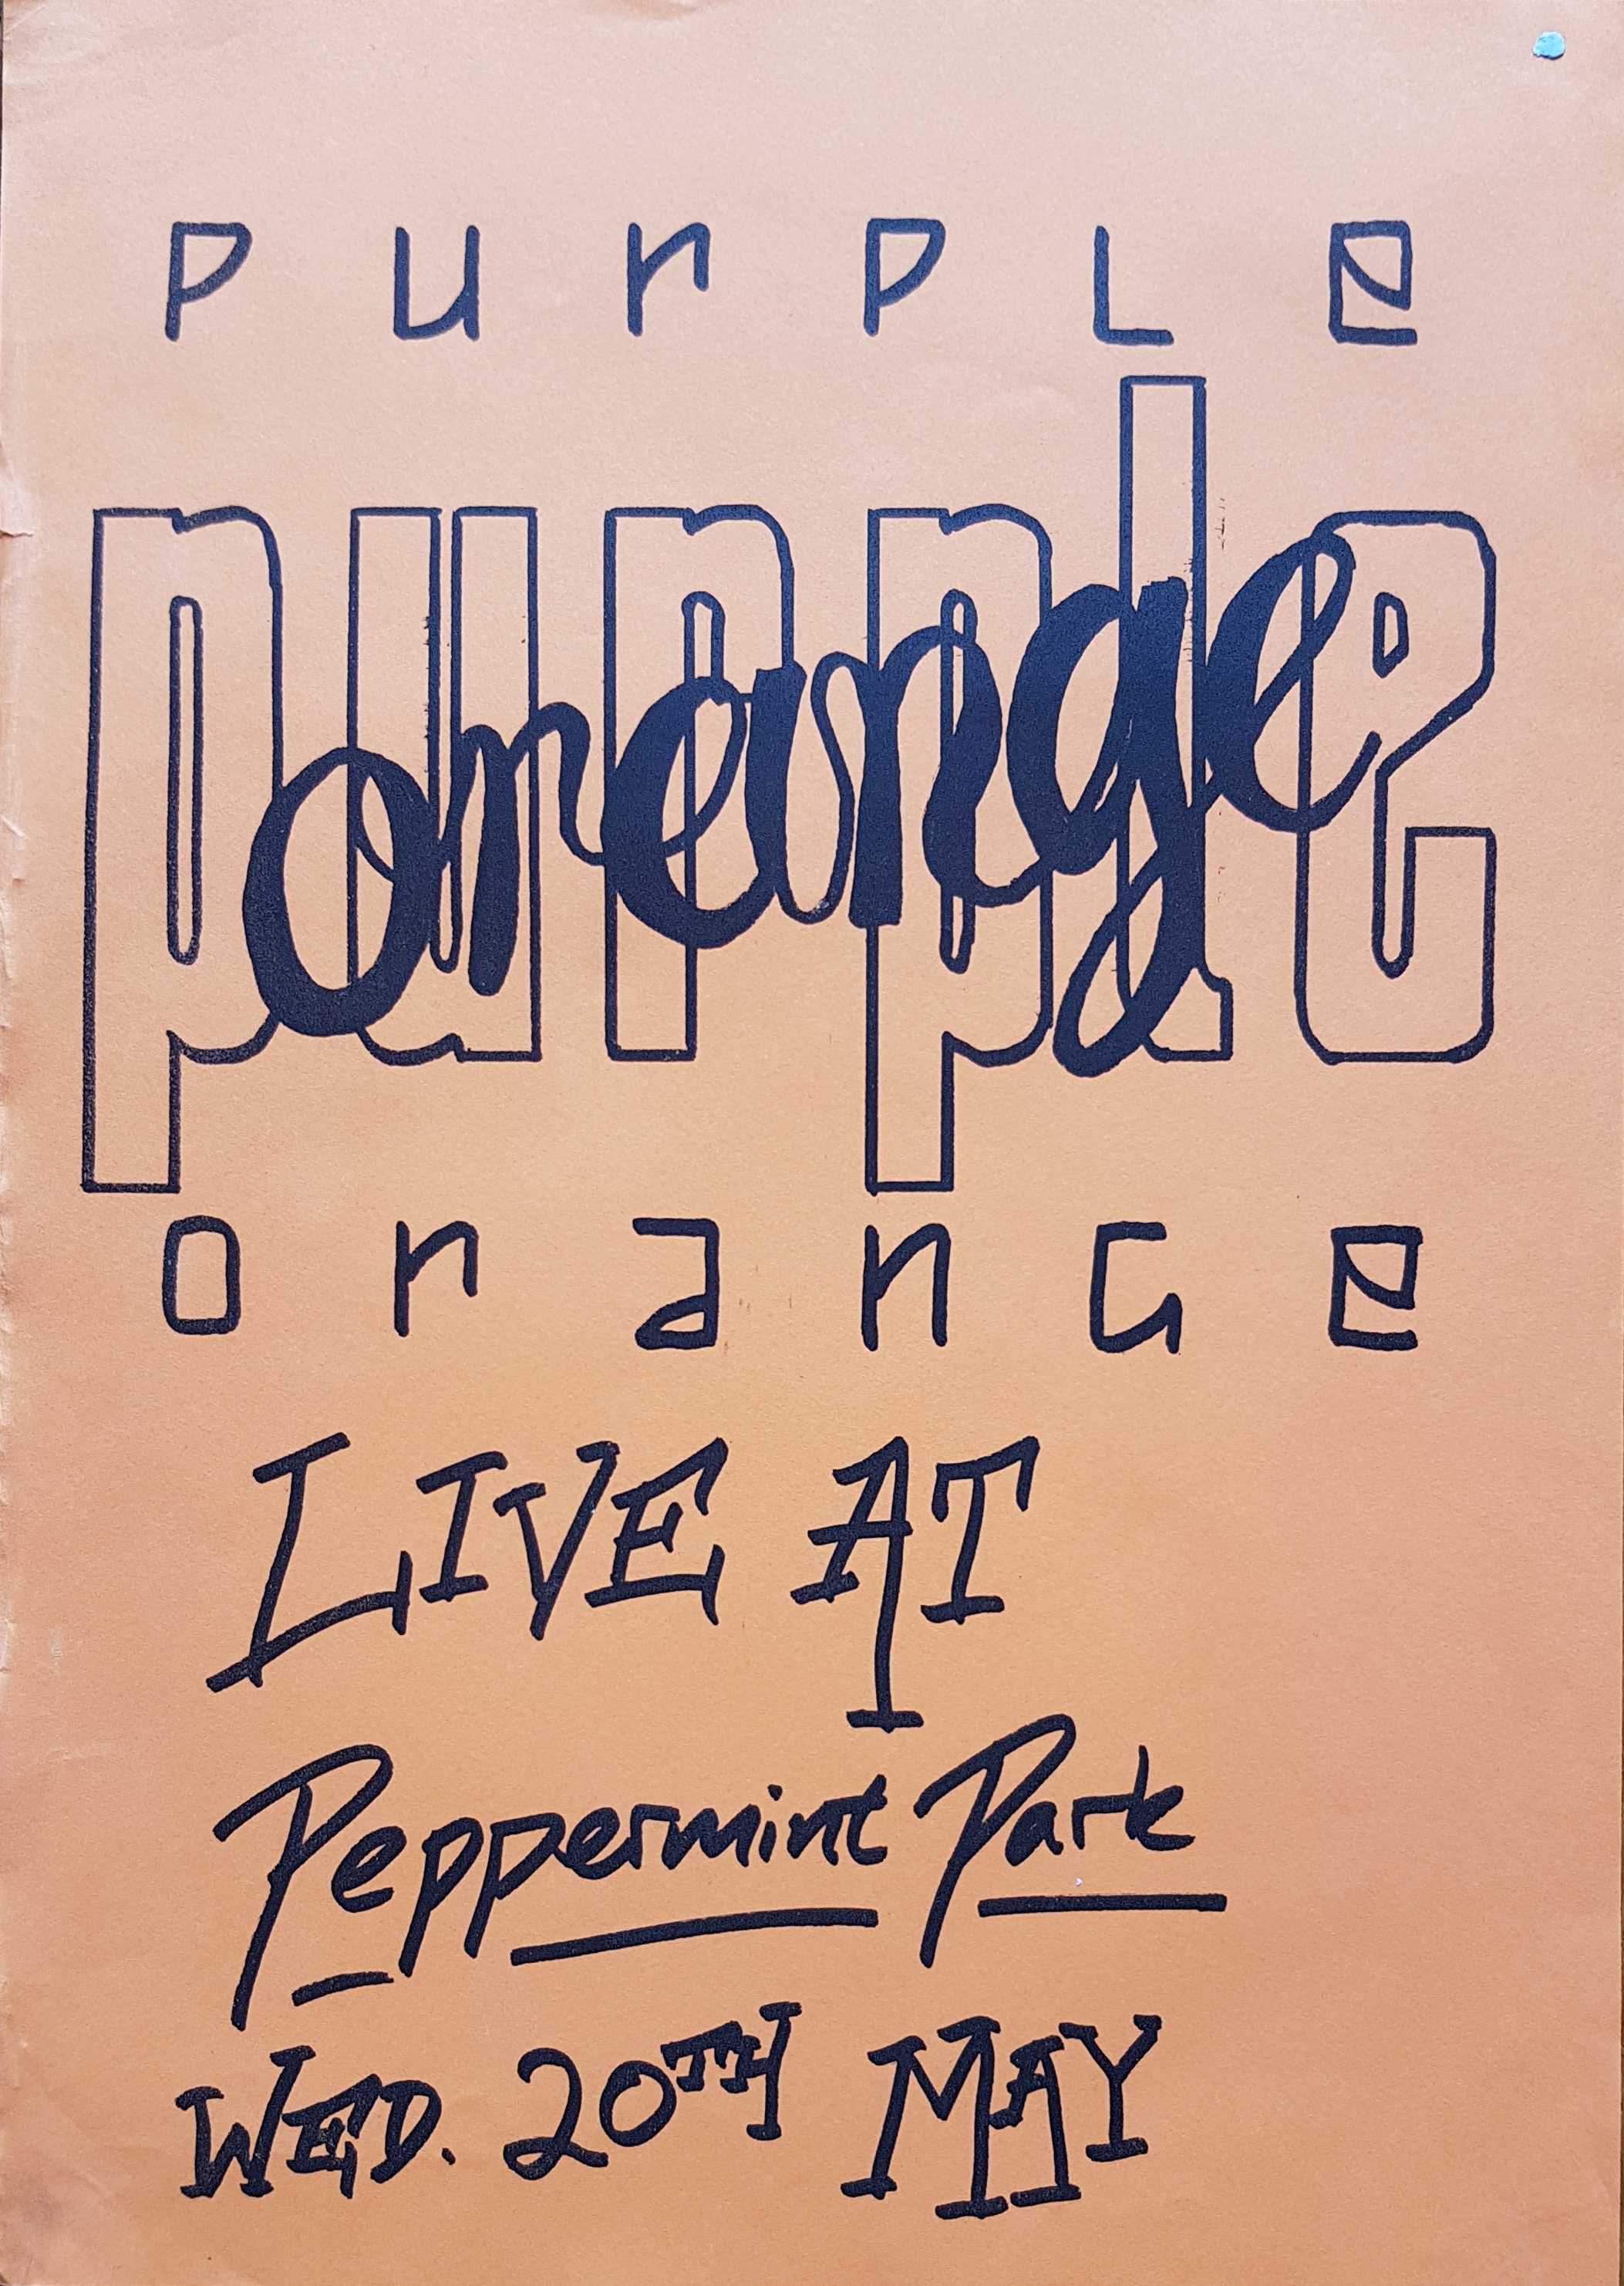 Picture of Poster-TLG-PPS3 Peppermint Park v3 - Small by artist Purple Orange